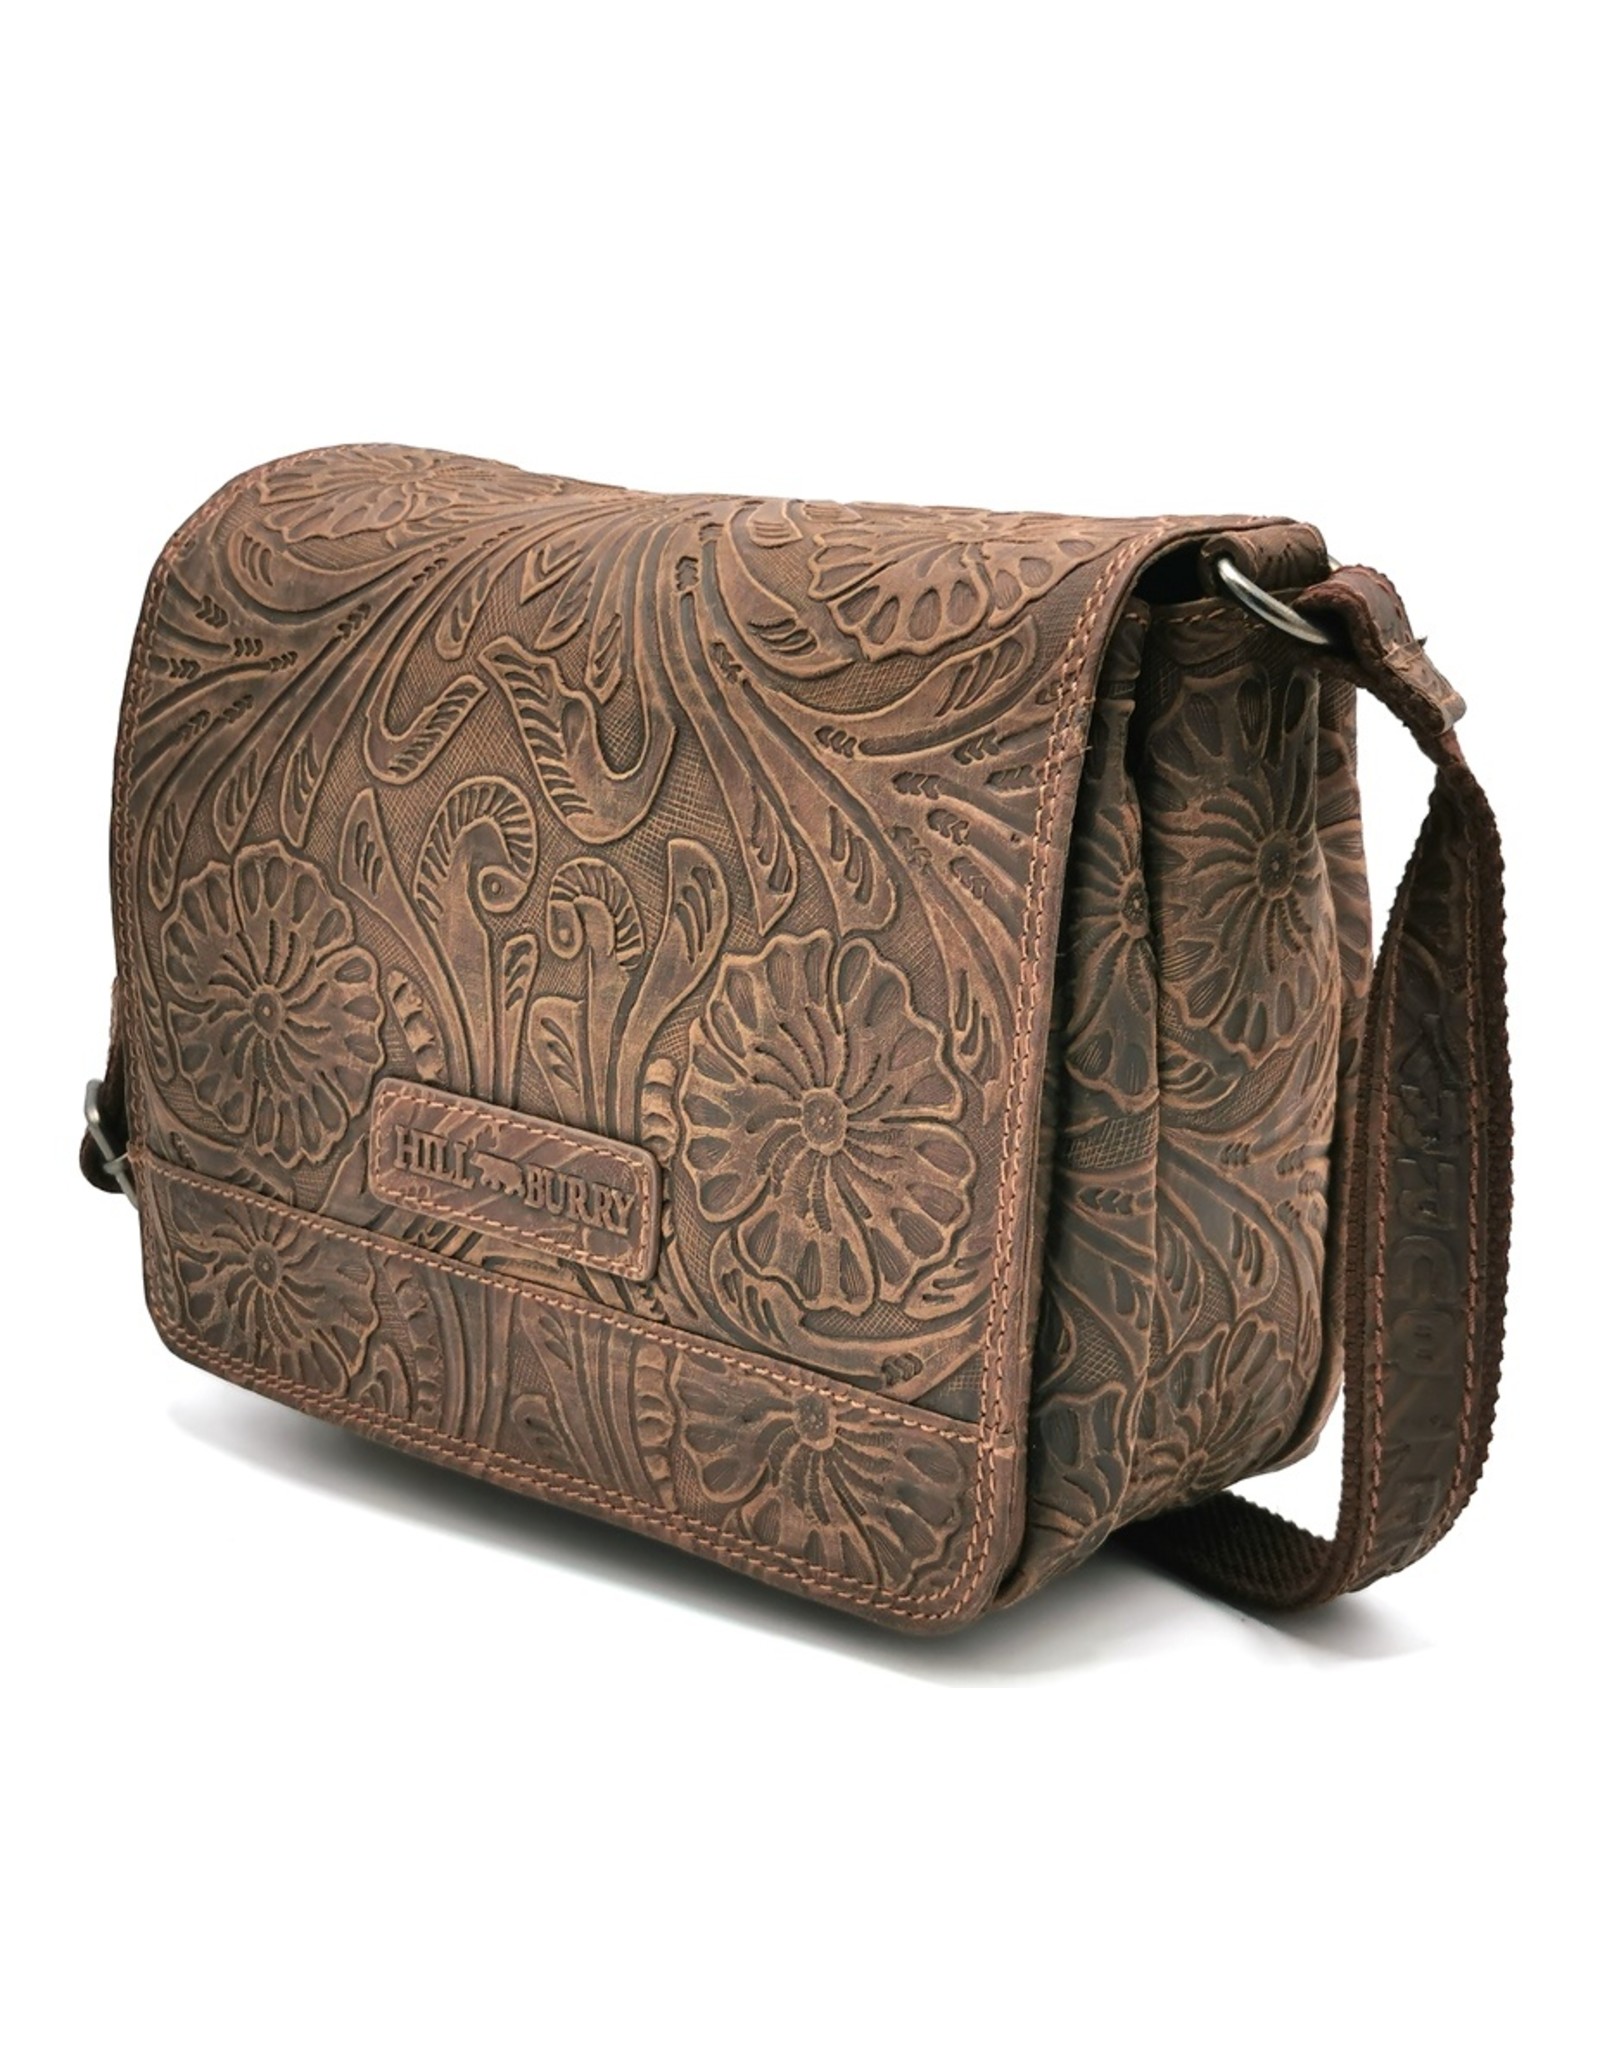 HillBurry Leather bags - Hillburry Shoulder bag with Embossed Flowers Brown